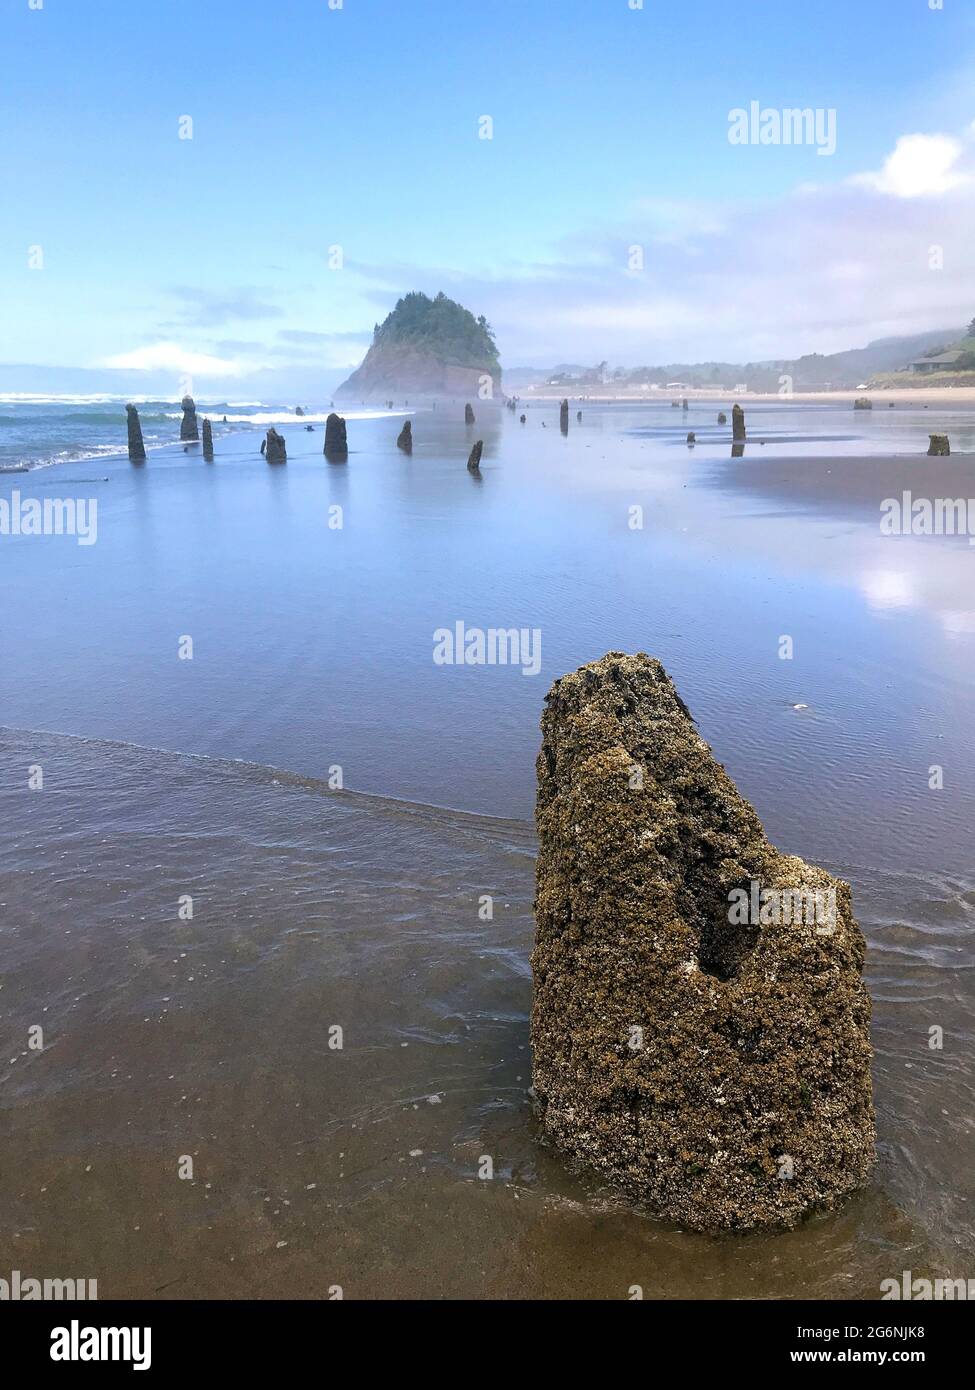 Along the Oregon Coast: Neskowin Ghost Forest - remains of ancient sitka spruce trees sunk under the water after an earthquake 2000 years ago. Stock Photo